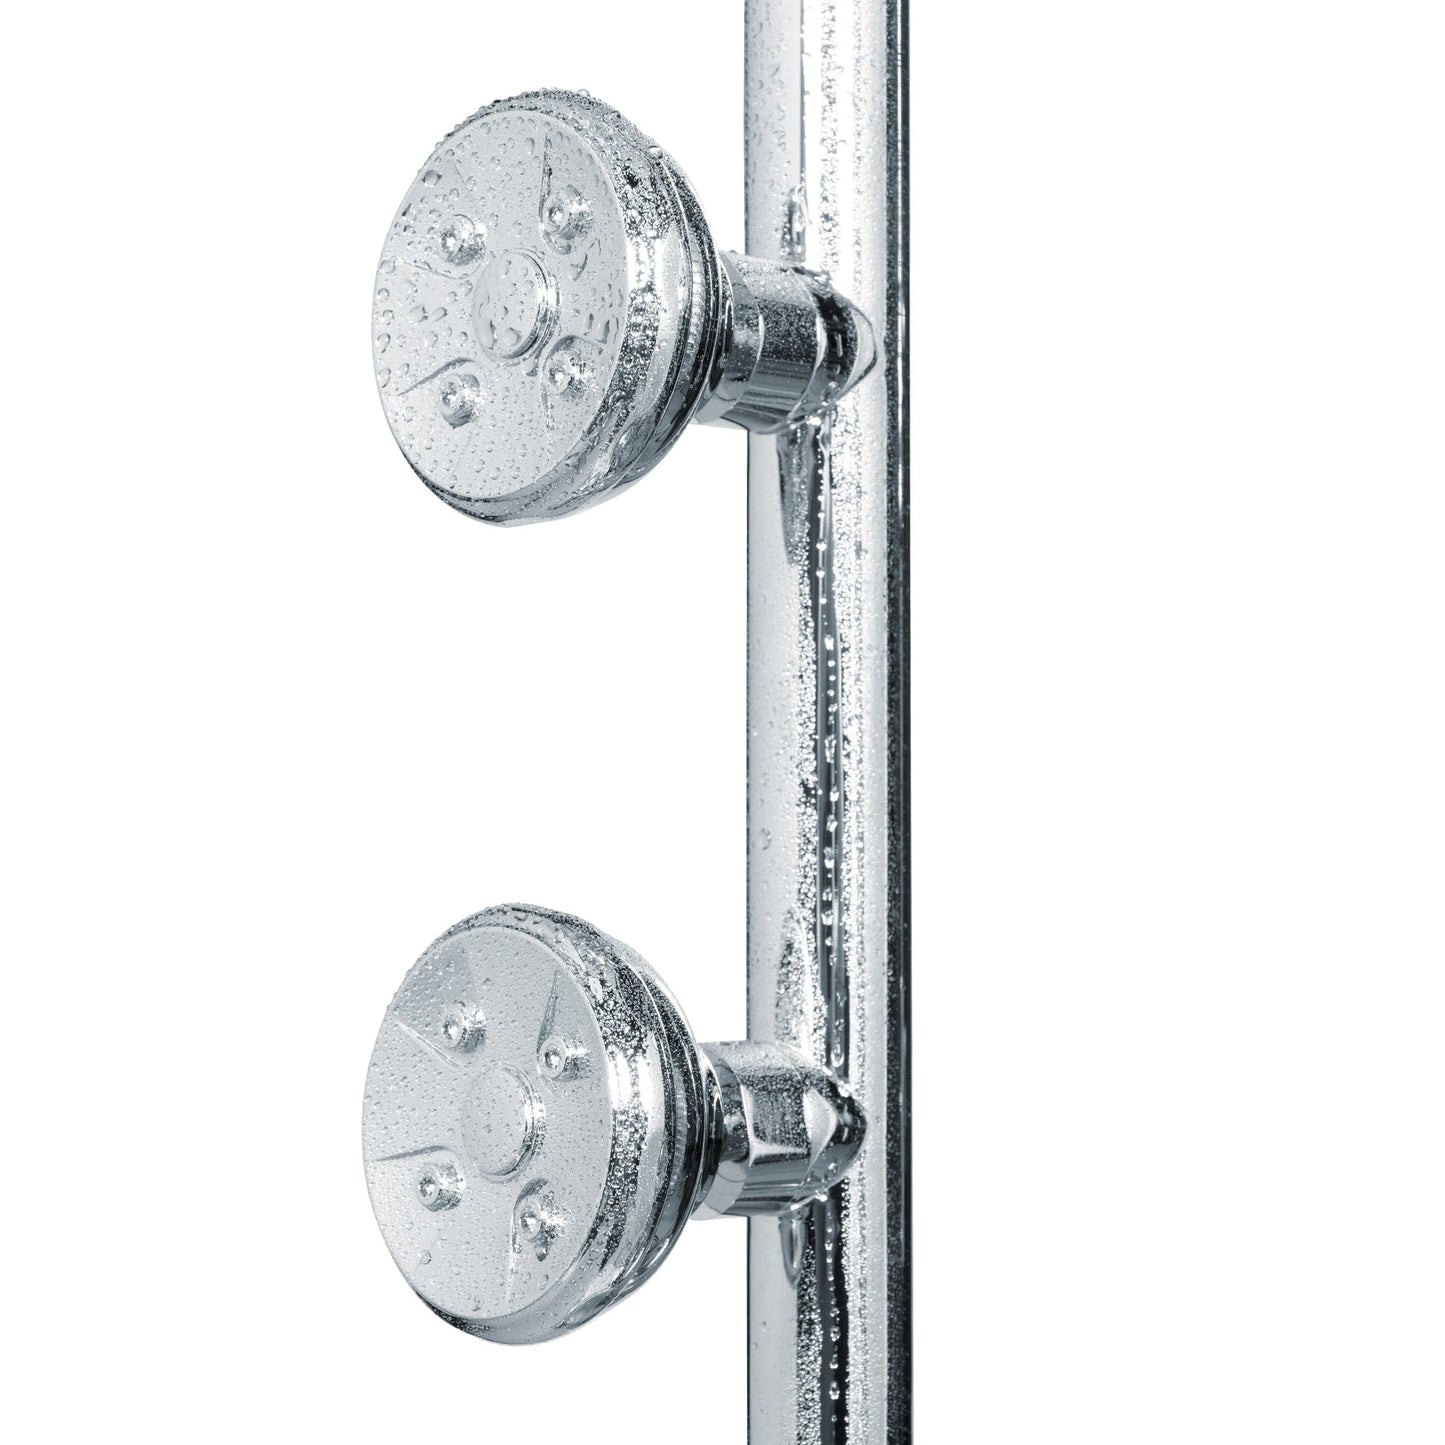 PULSE ShowerSpas Lanai 2.5 GPM Rain Shower System in Chrome Finish With 3-Power Spray Body Jet and 3-Function Hand Shower